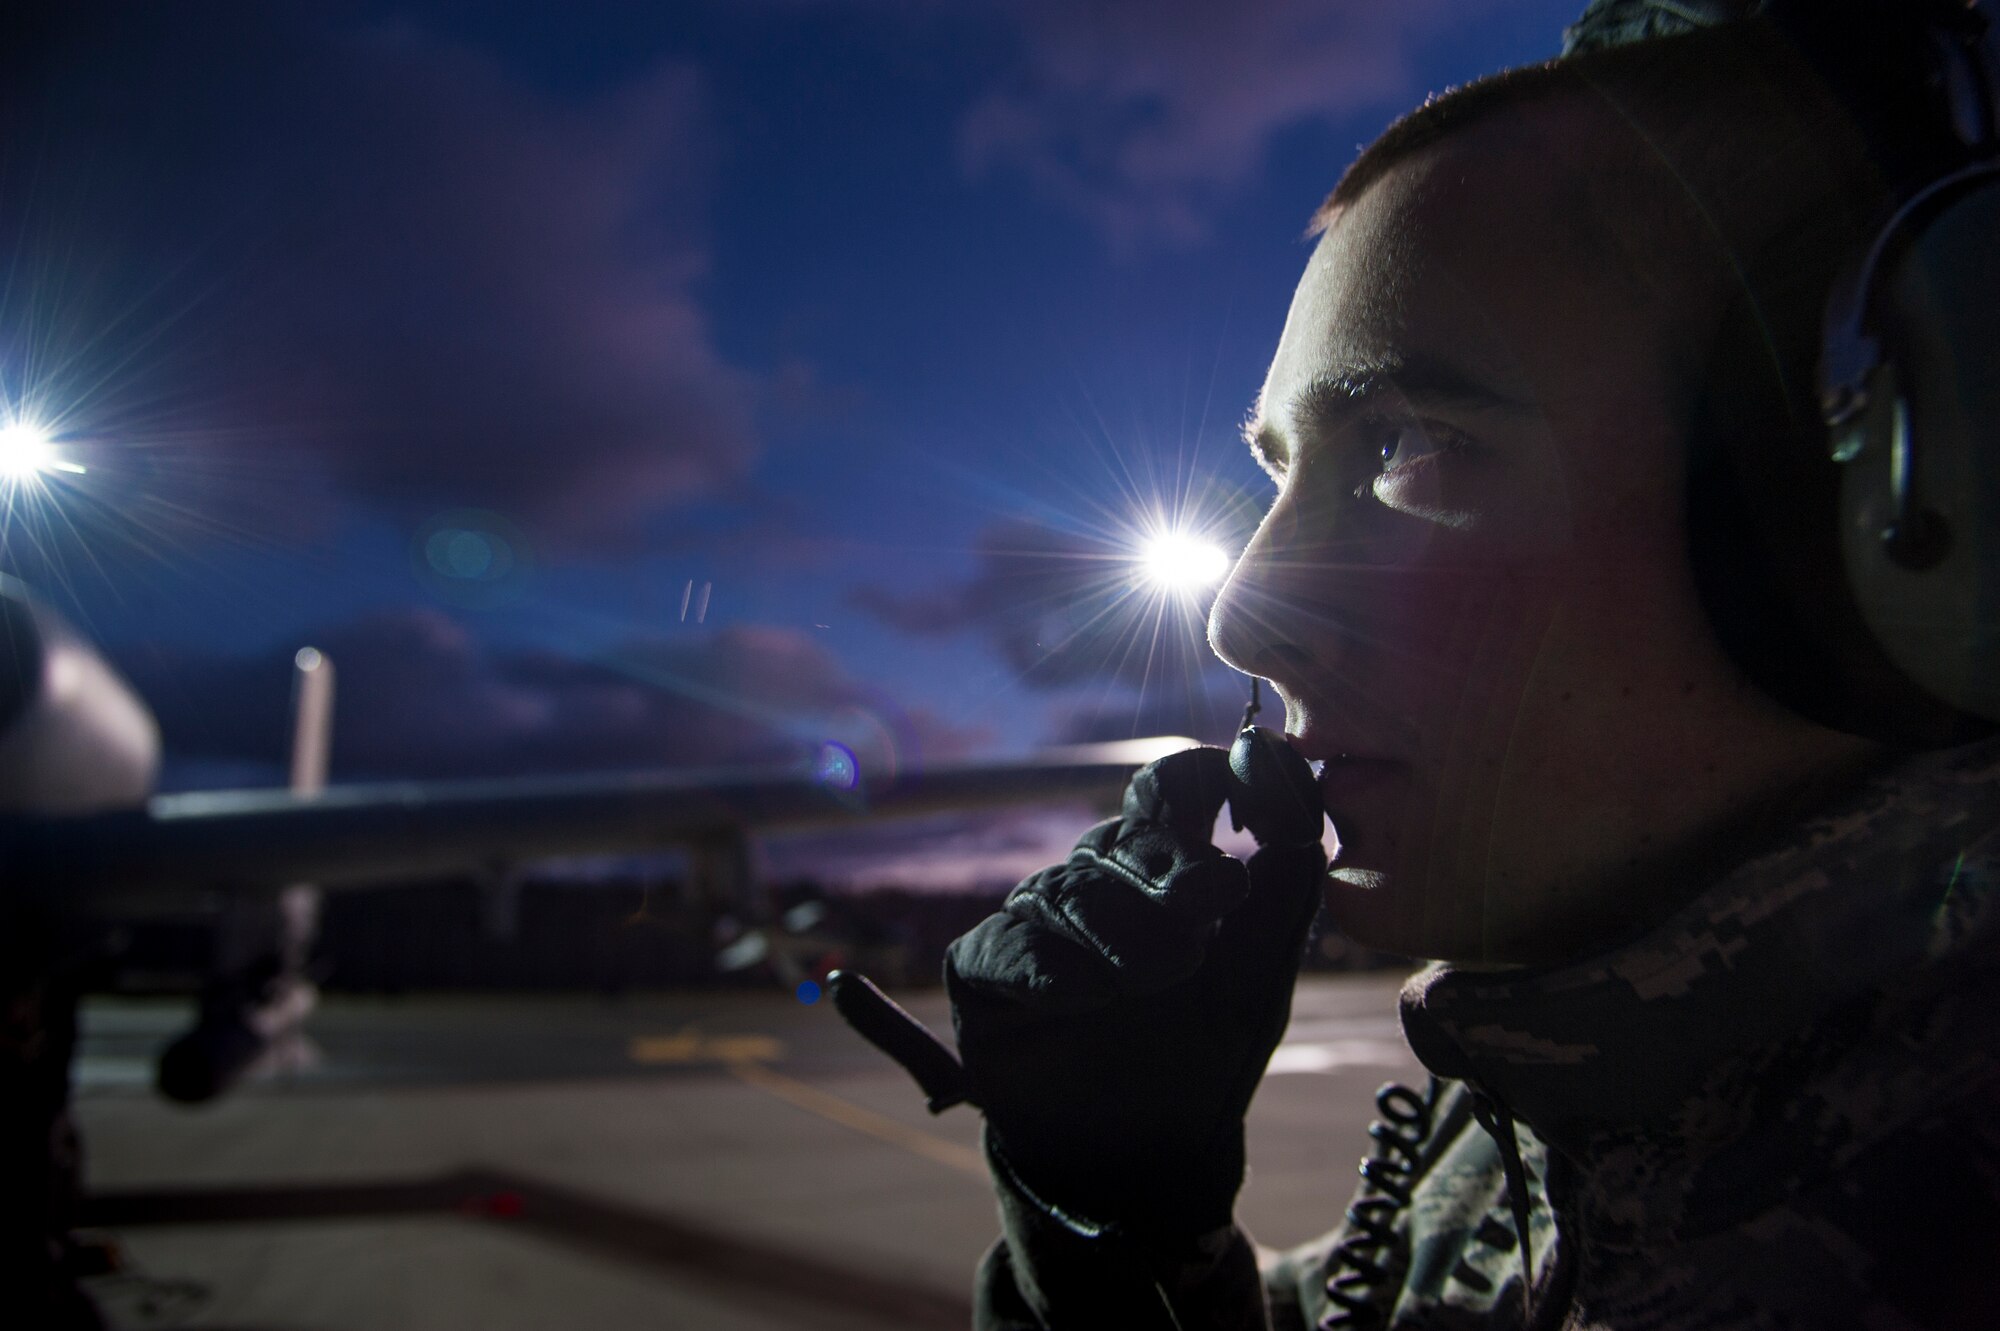 U.S. Air Force Senior Airman Zachery Noordyke, 74th Expeditionary Fighter Squadron crew chief, communicates with an A-10 Thunderbolt II attack aircraft pilot during pre-flight inspections on the flightline, Nov. 11, 2015, at Amari Air Base, Estonia. Noordyke is deployed from the 23d Wing at Moody Air Force Base, Ga., as part of theater security package in support of Operation Atlantic Resolve. (U.S. Air Force photo by Andrea Jenkins/Released)